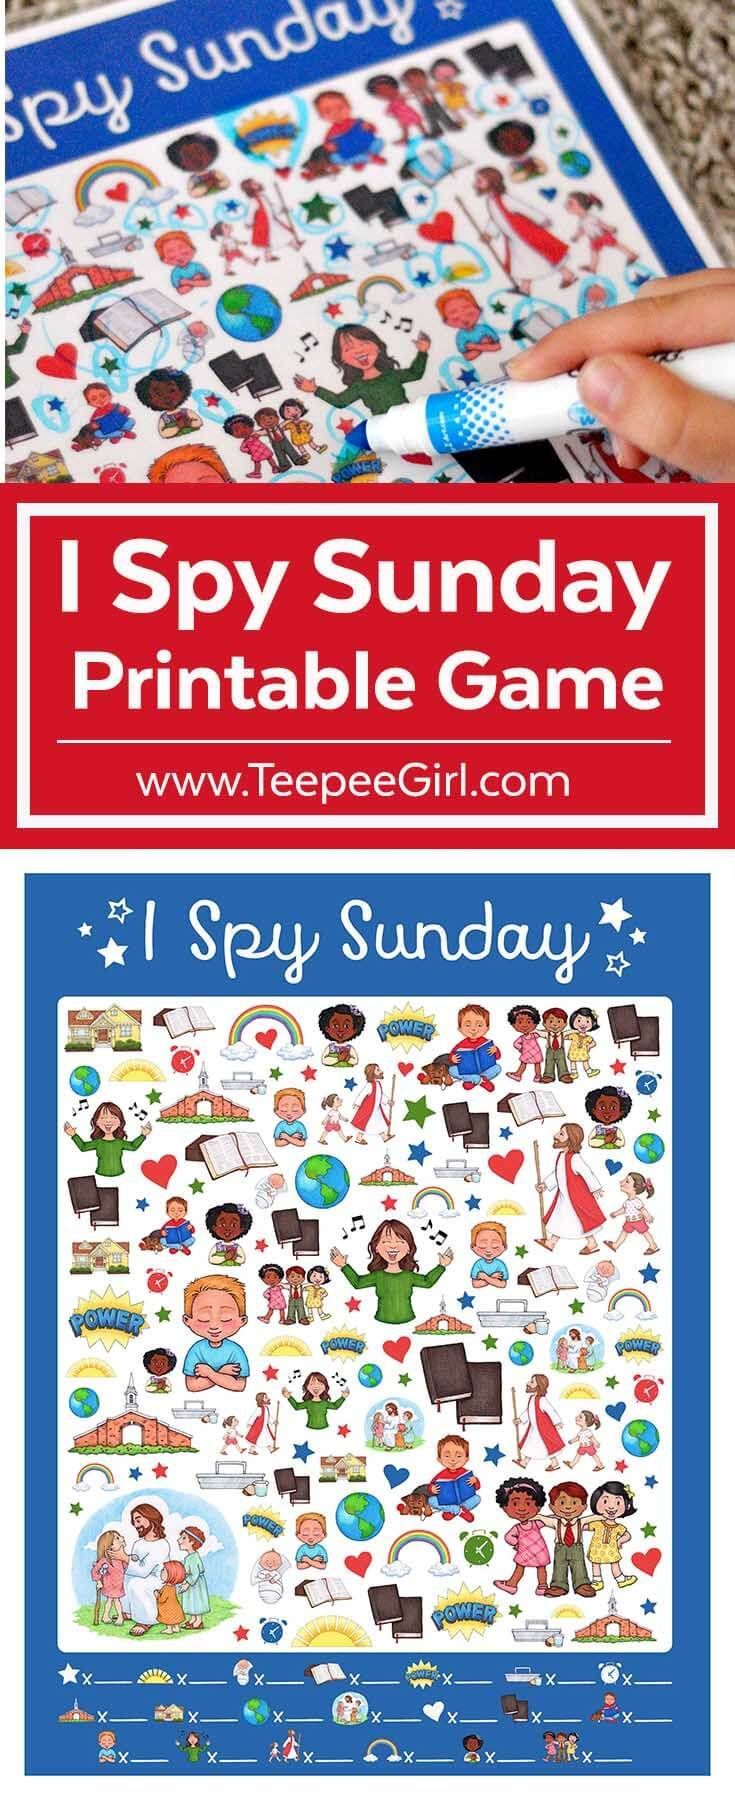 This free I Spy Sunday printable game is perfect for church, Sunday School, primary, and family home evening! If you are looking